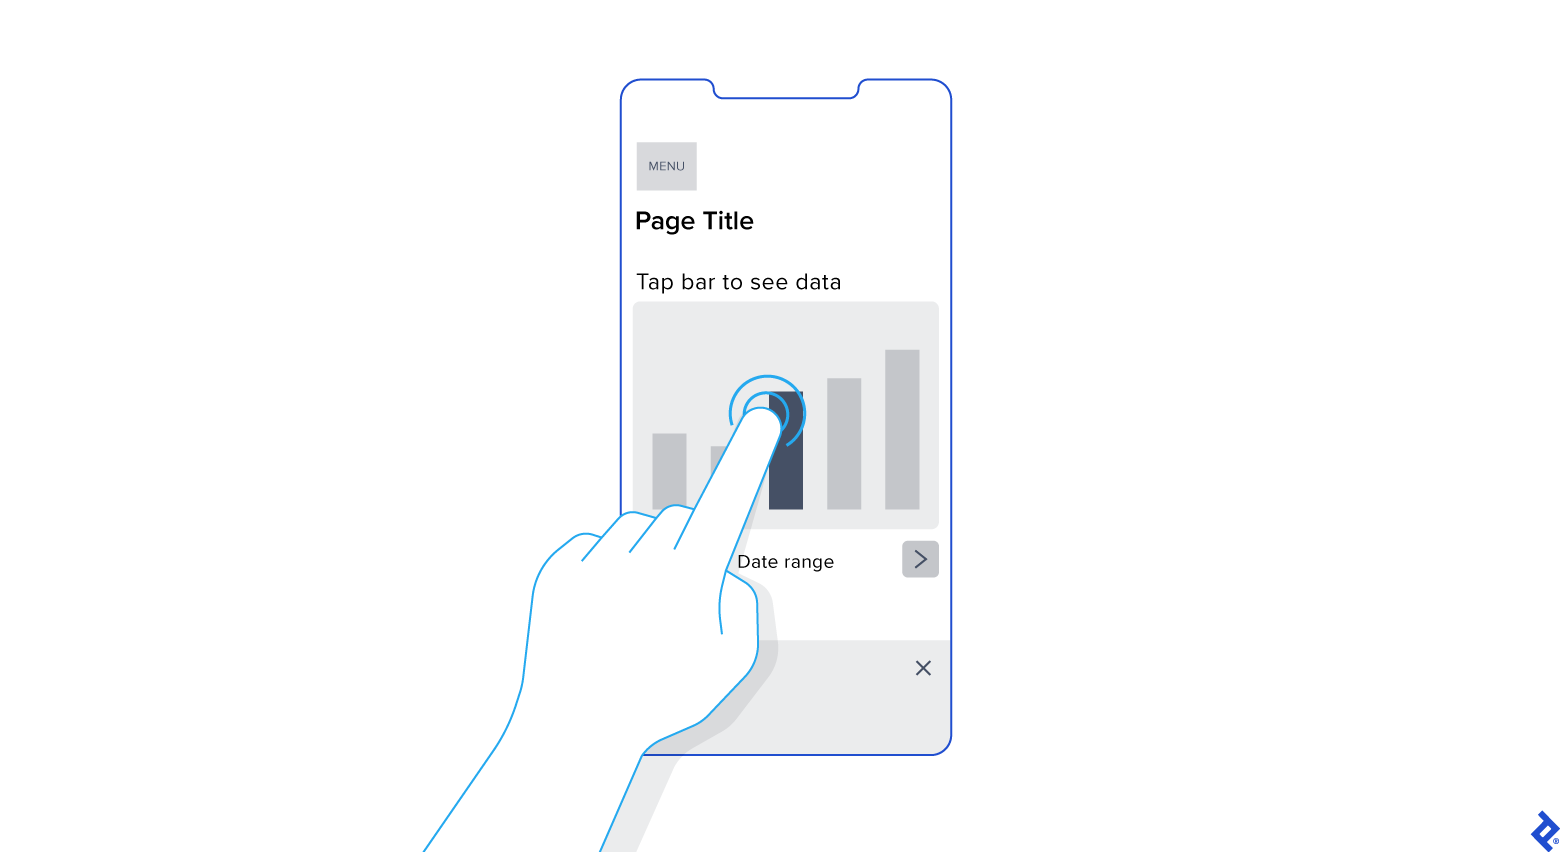 This mockup of a mobile app dashboard design replicates a desktop hover state via the user’s physically tapping on the bar of a graph to display more information.